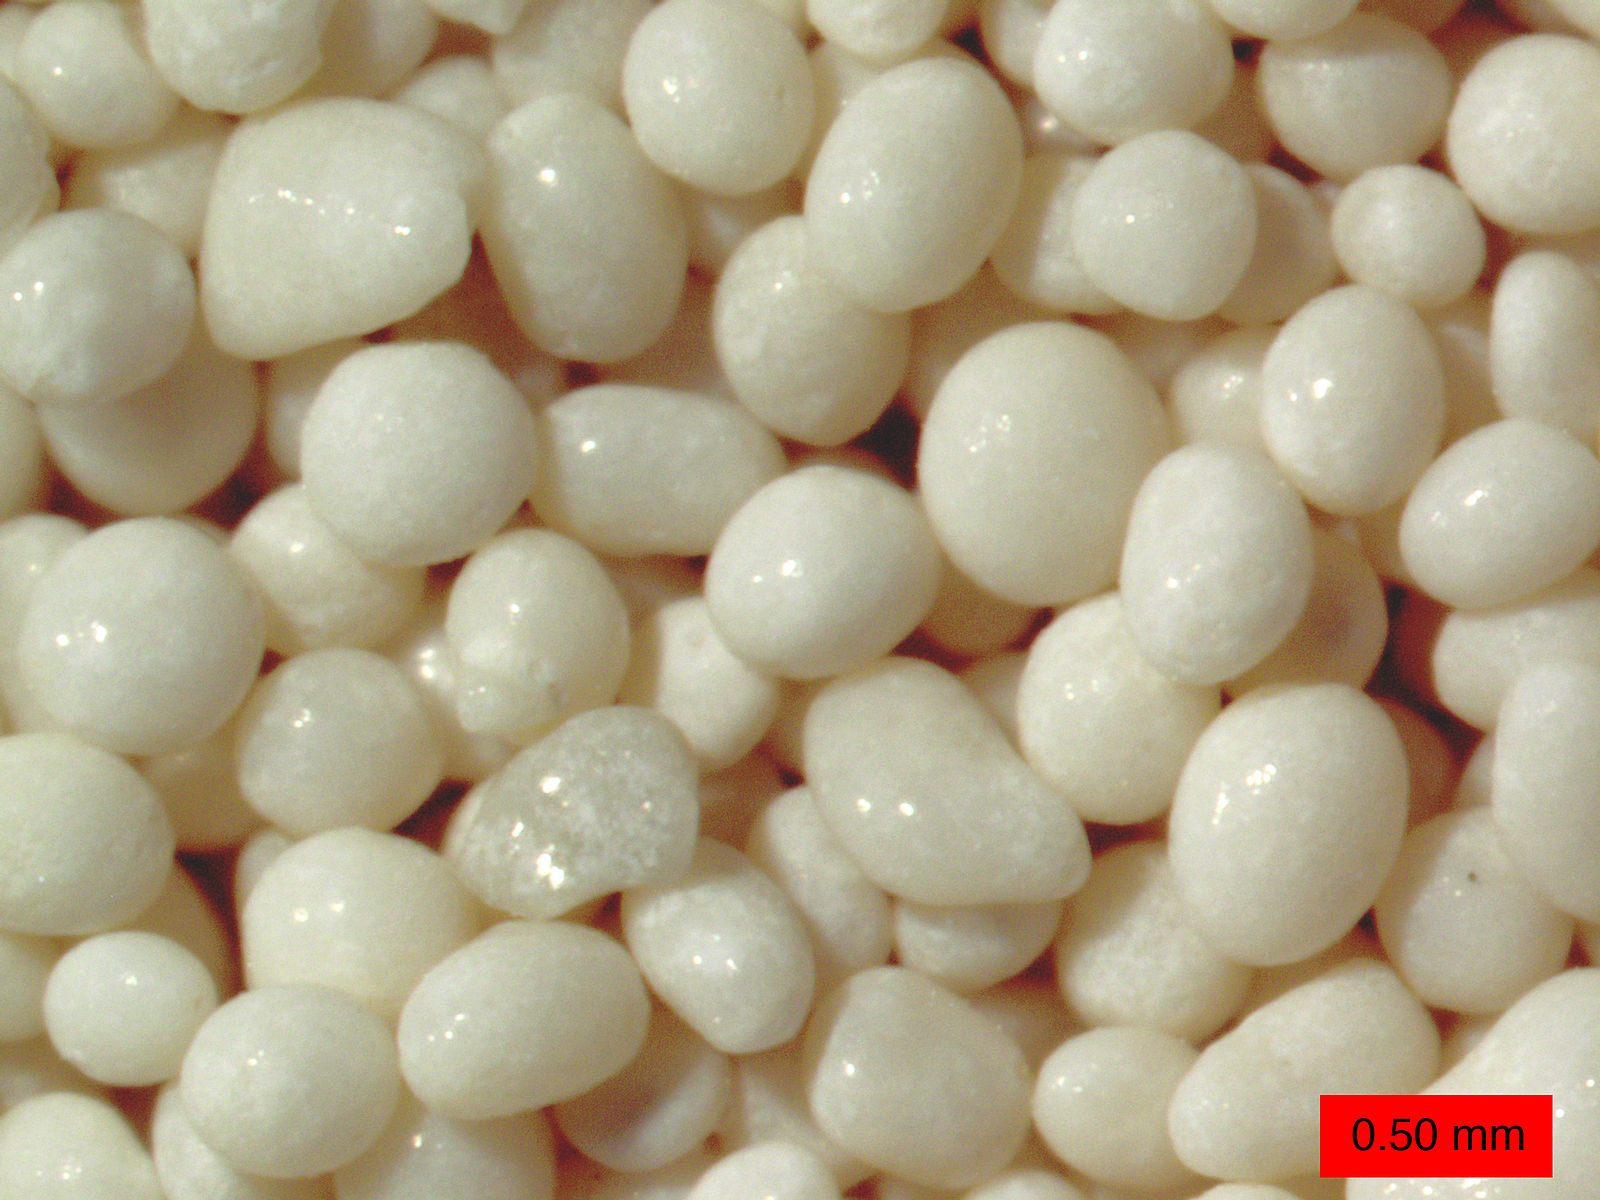 Zoomed-in photo of a cluster of pearly white smooth, rounded grains; a scale bar at the lower right says 0.50 mm.